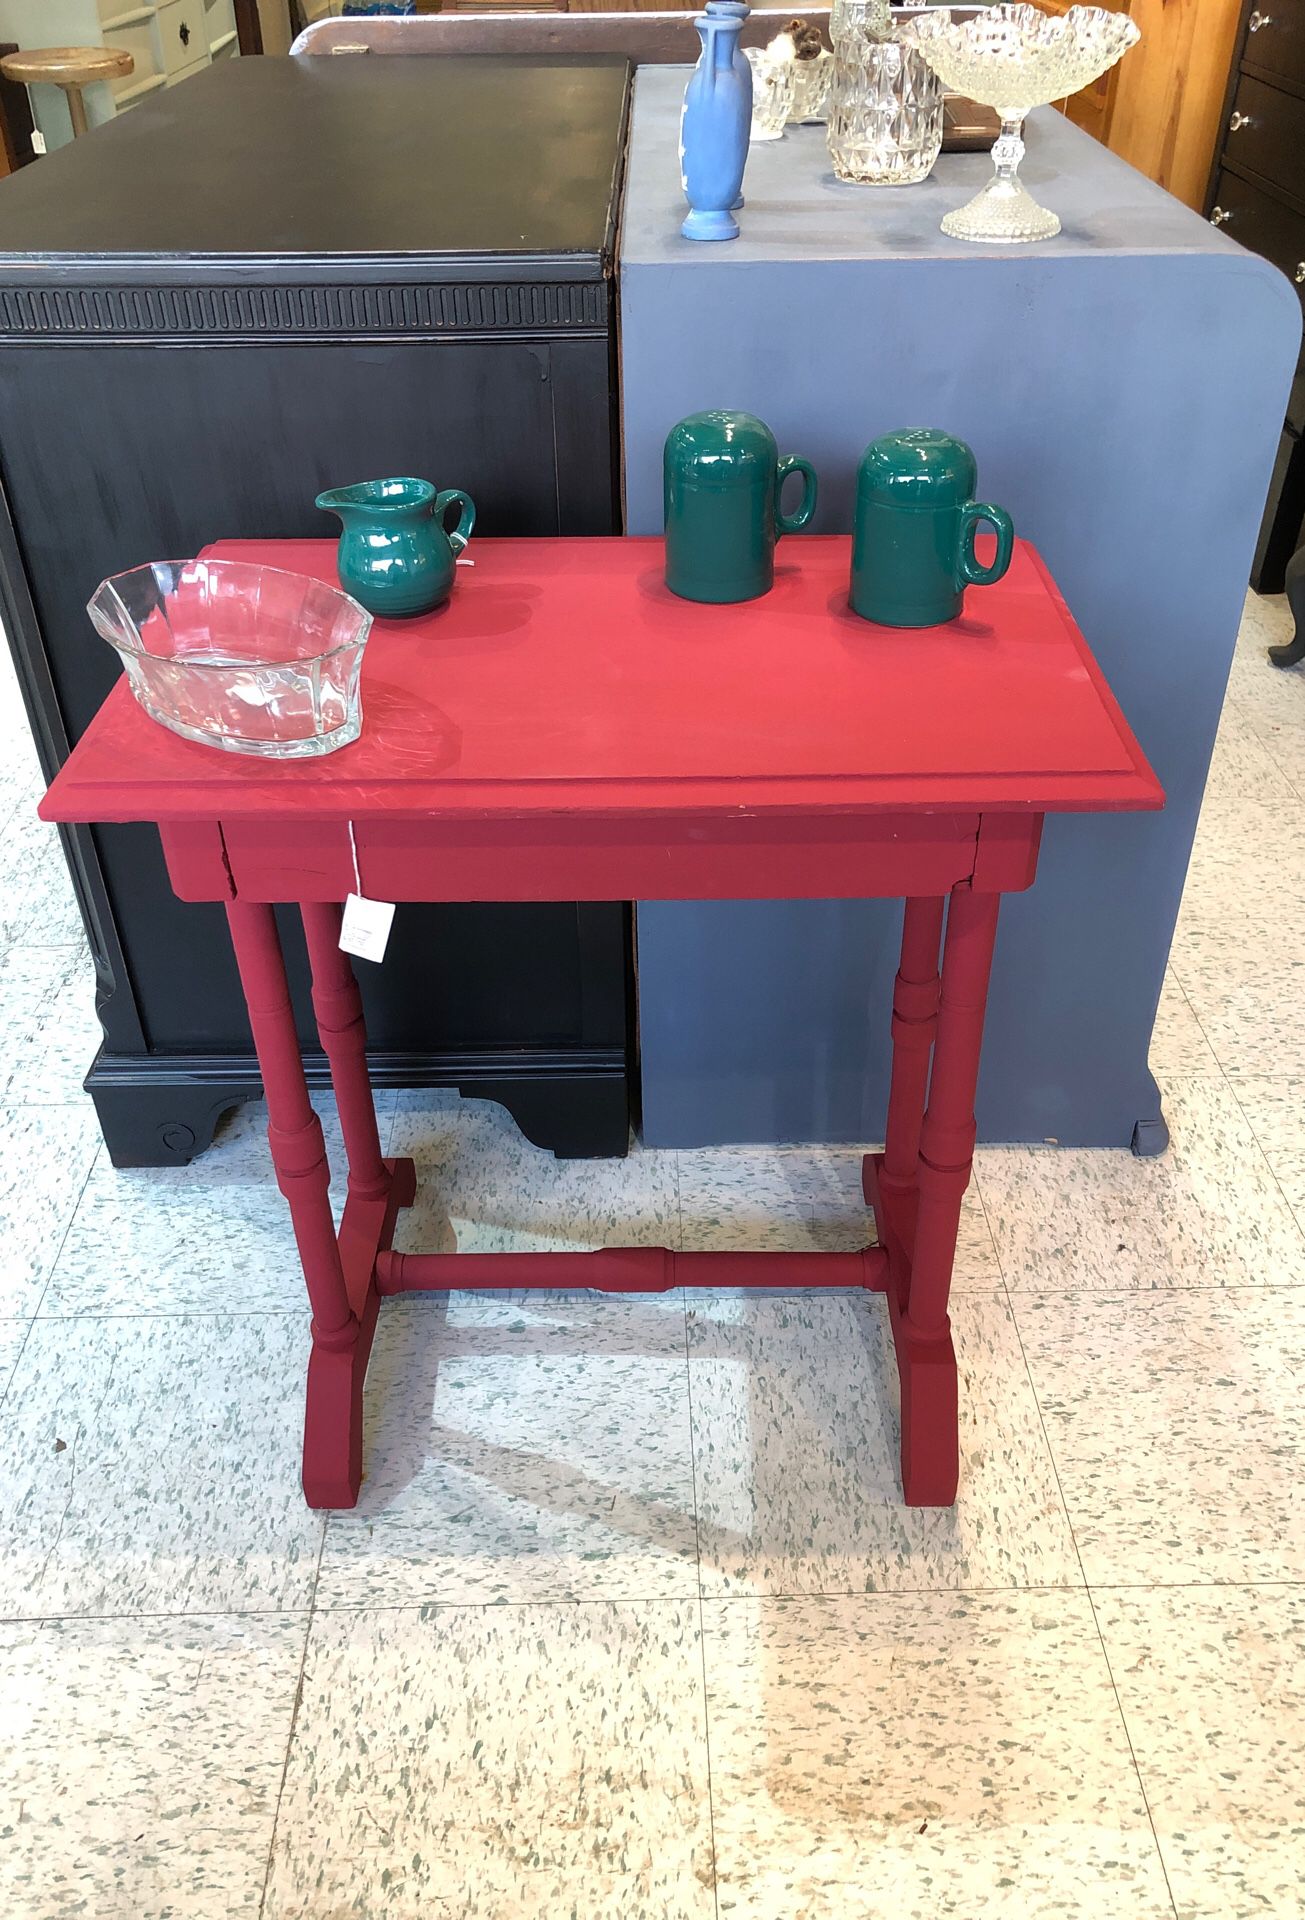 Small writing desk freshly painted cranberry sauce